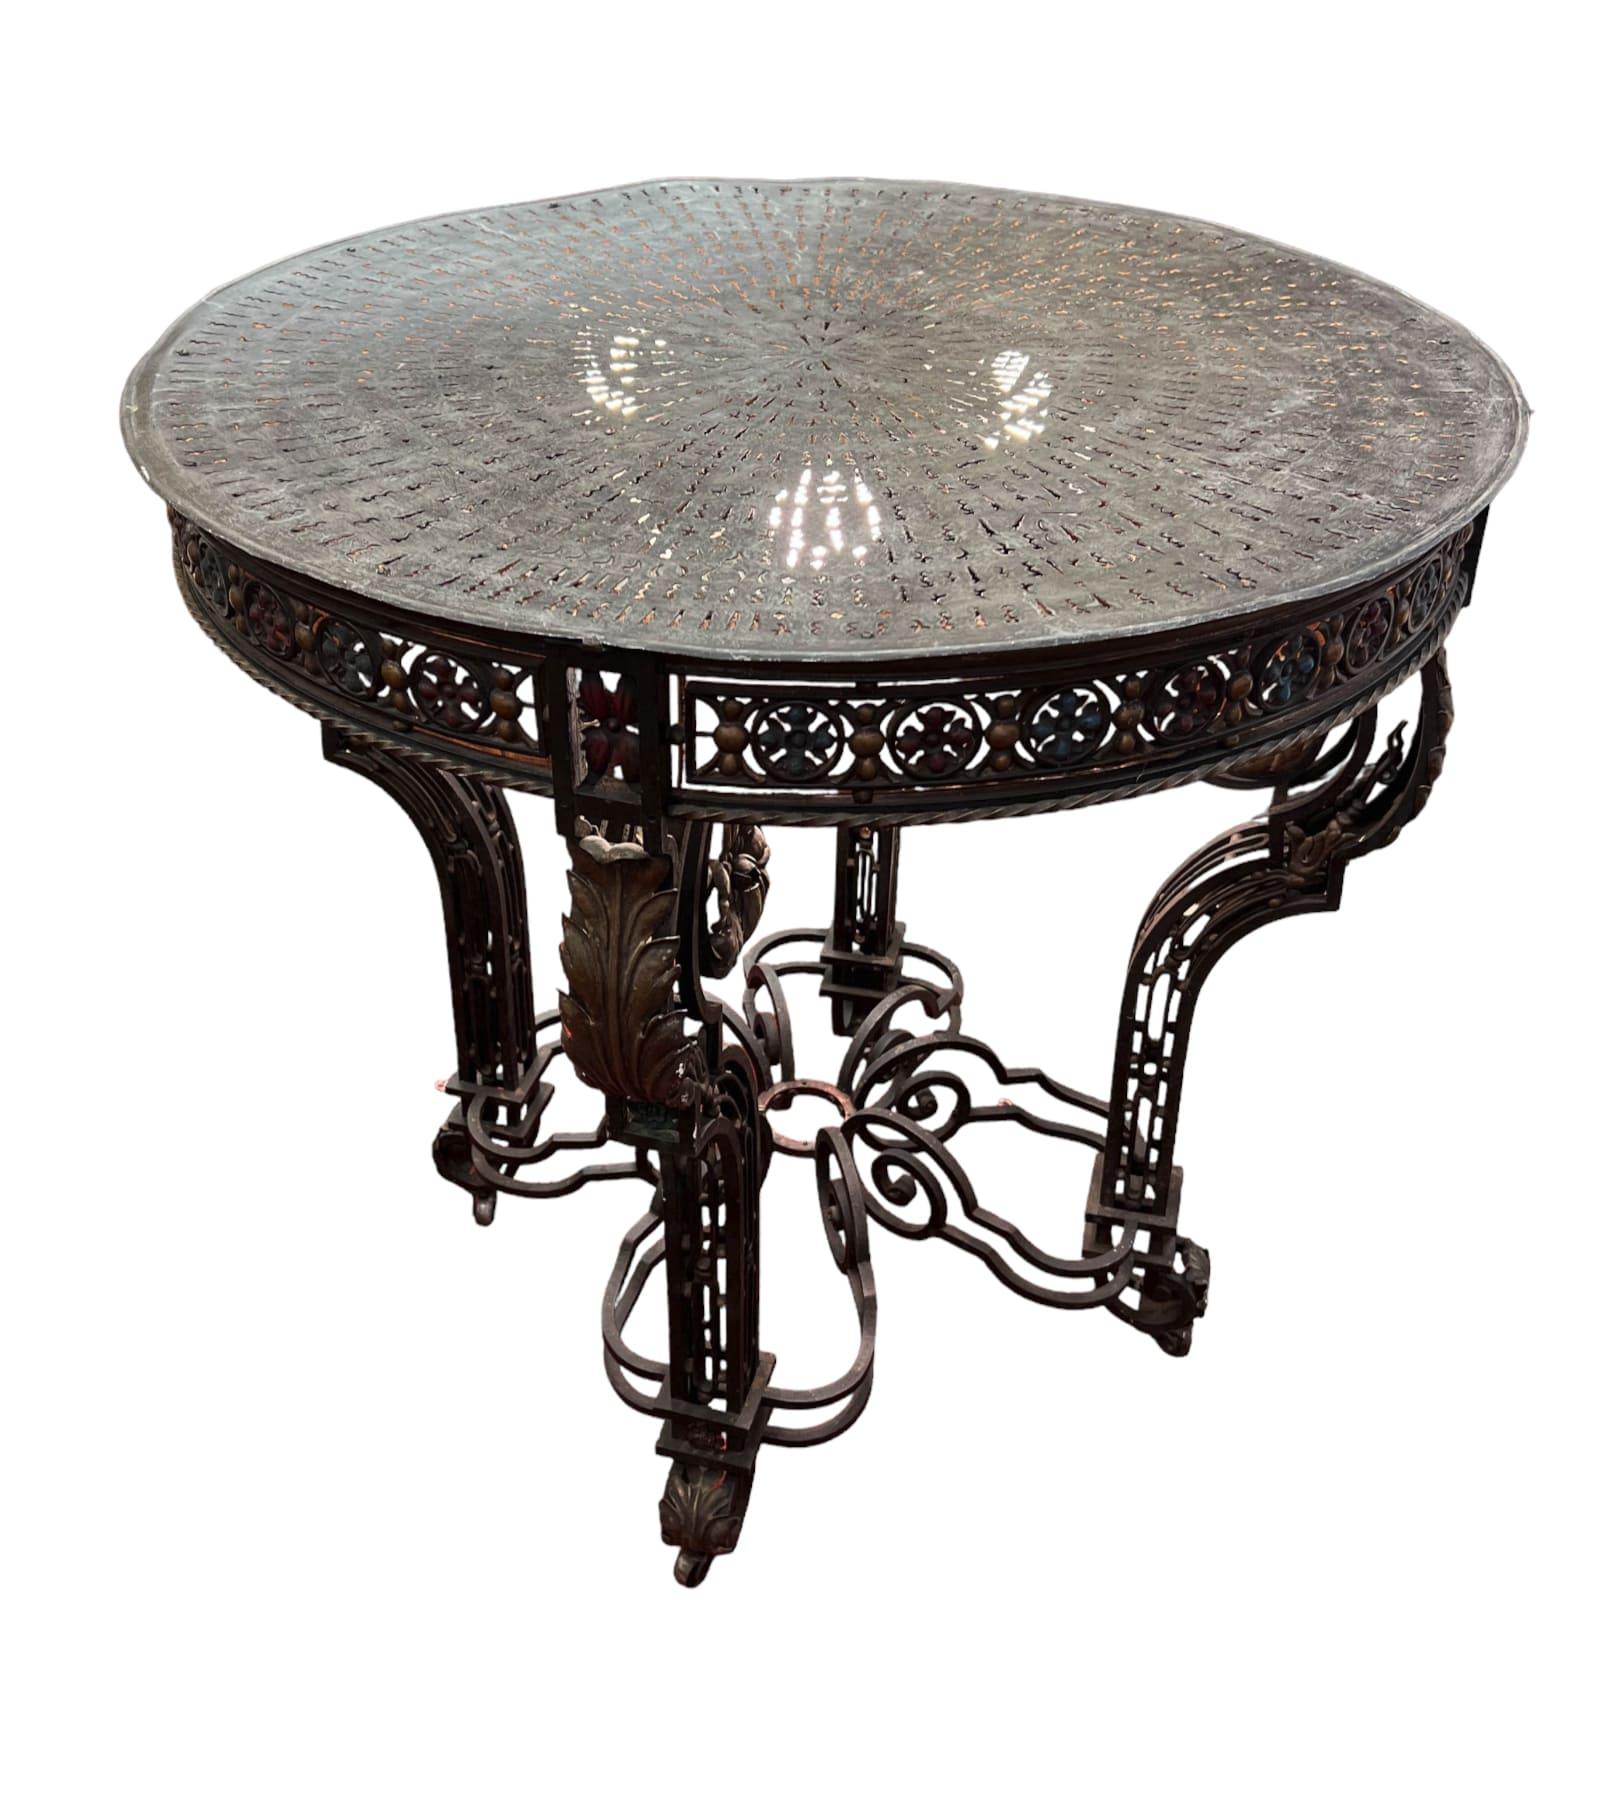 19th Century Wrought Iron 32 Inch Round Table With Built-In Light For Sale 2